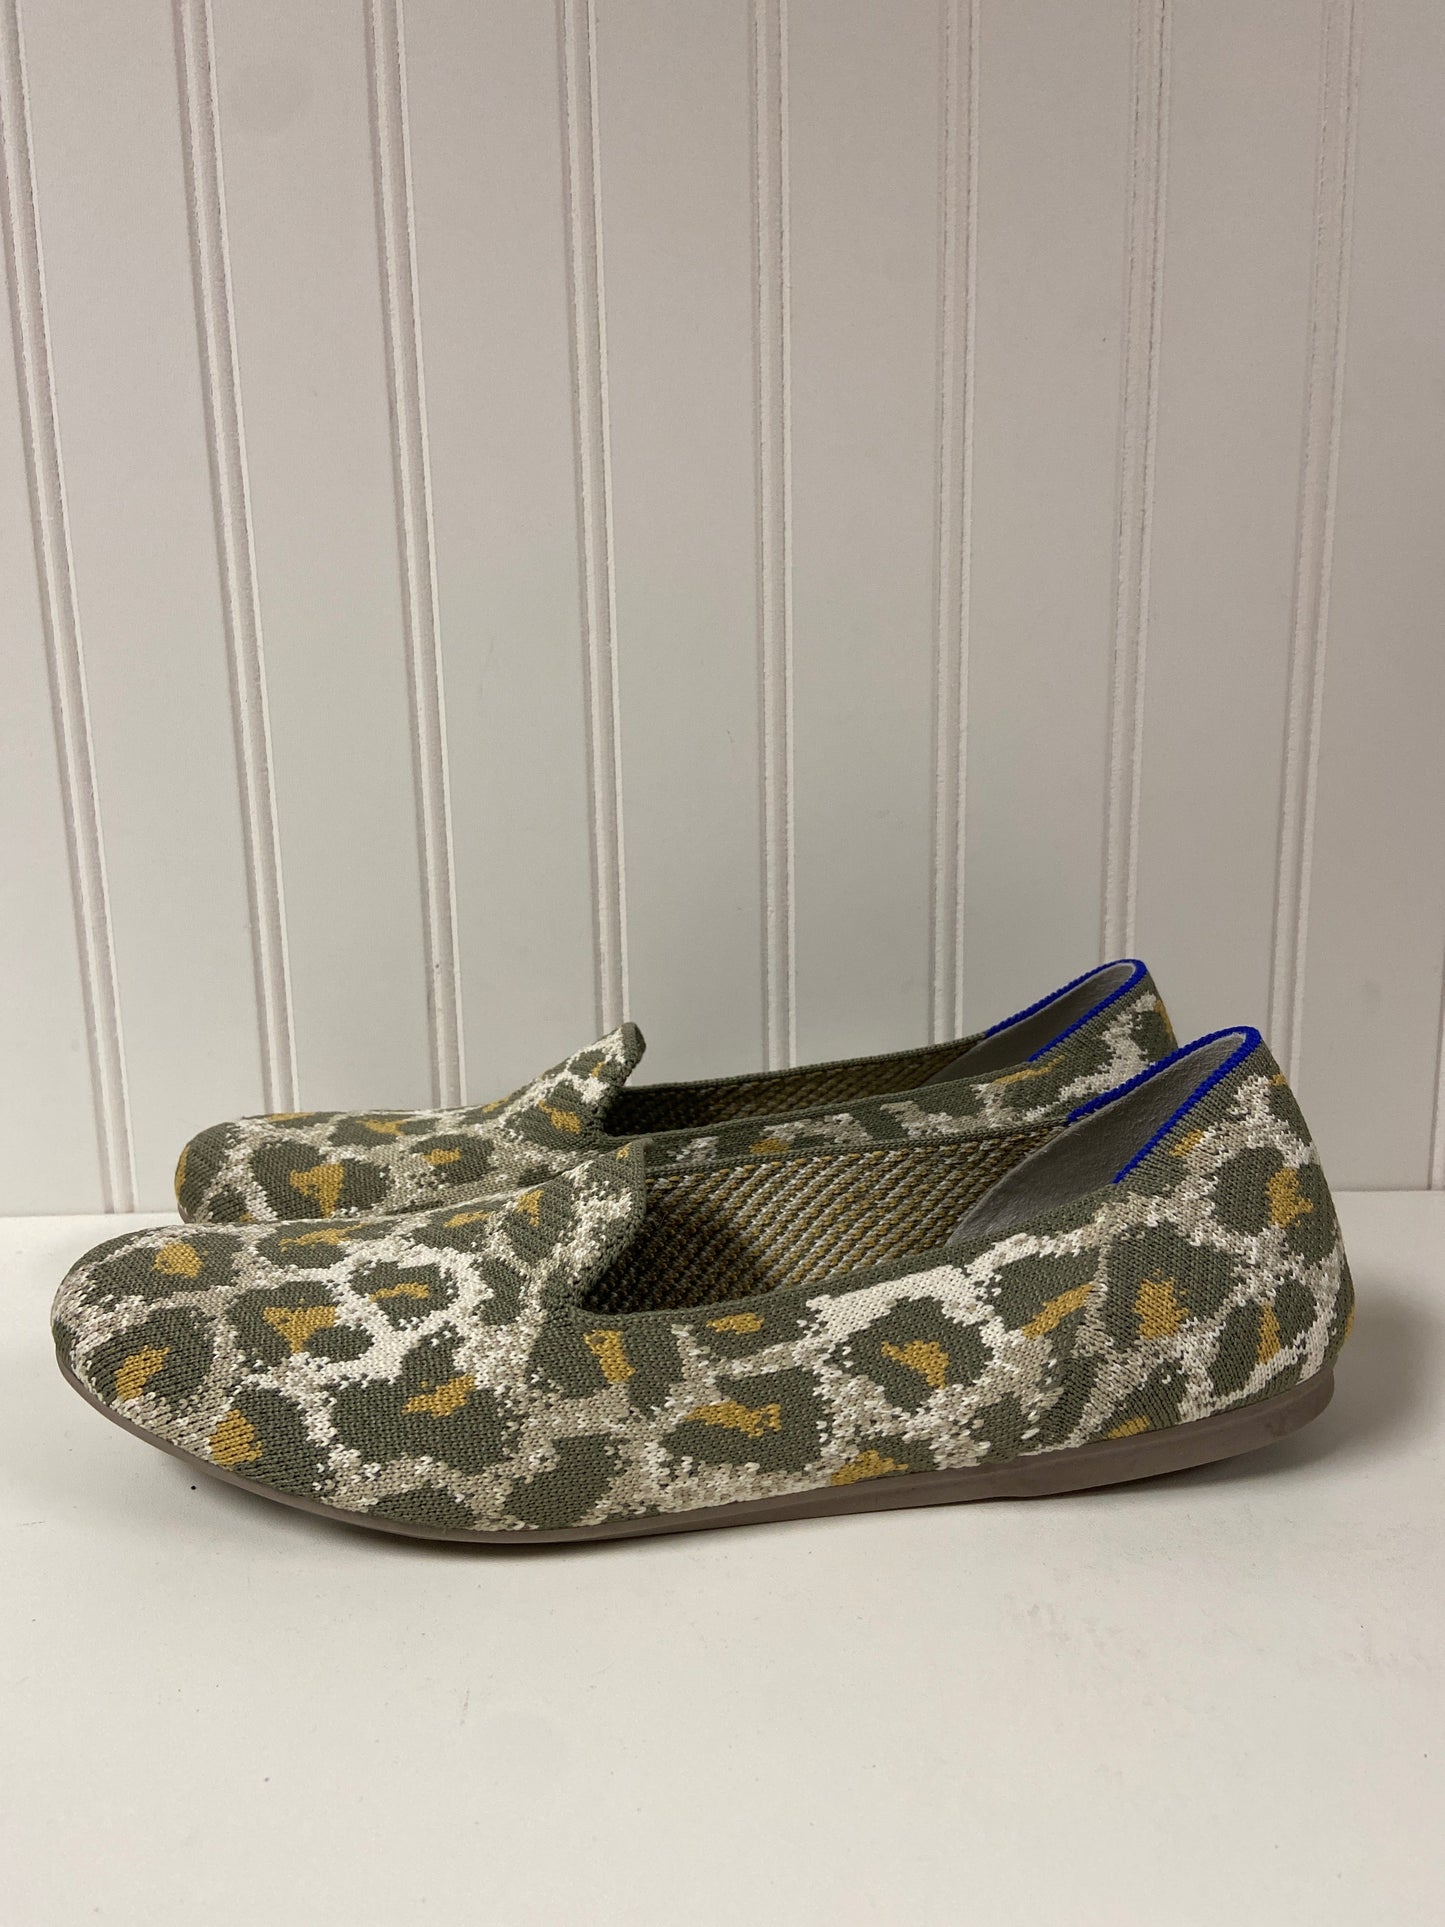 Animal Print Shoes Flats Rothys, Size 10.5